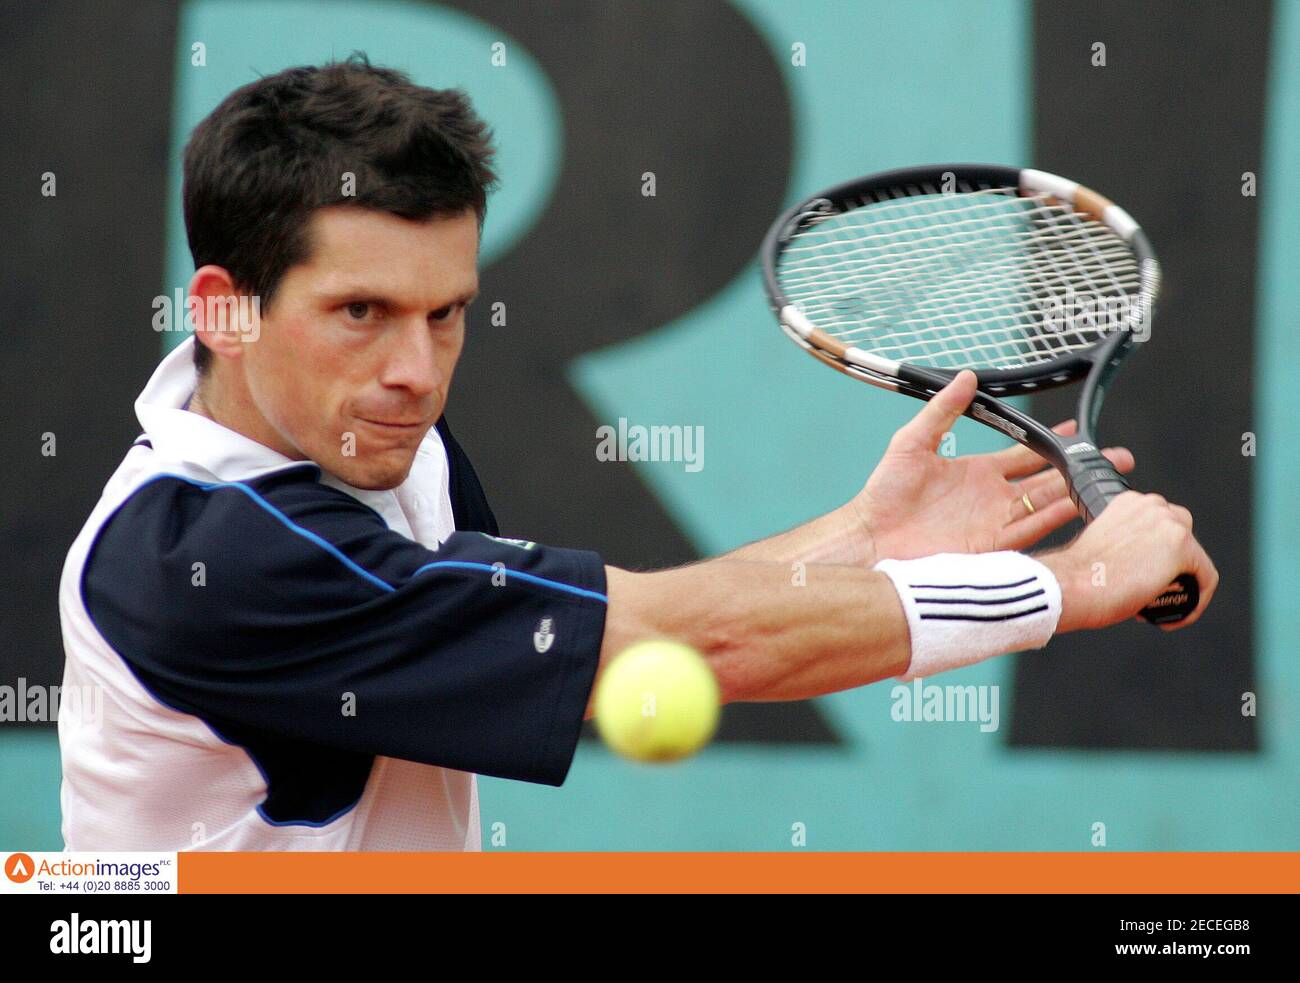 Tennis - French Open - Stade Roland Garros - 23/5/05  Great Britain's Tim Henman during his match against Juan Pablo Brzezicki of Argentina    Mandatory Credit: Action Images / Jason O'Brien  Livepic Stock Photo